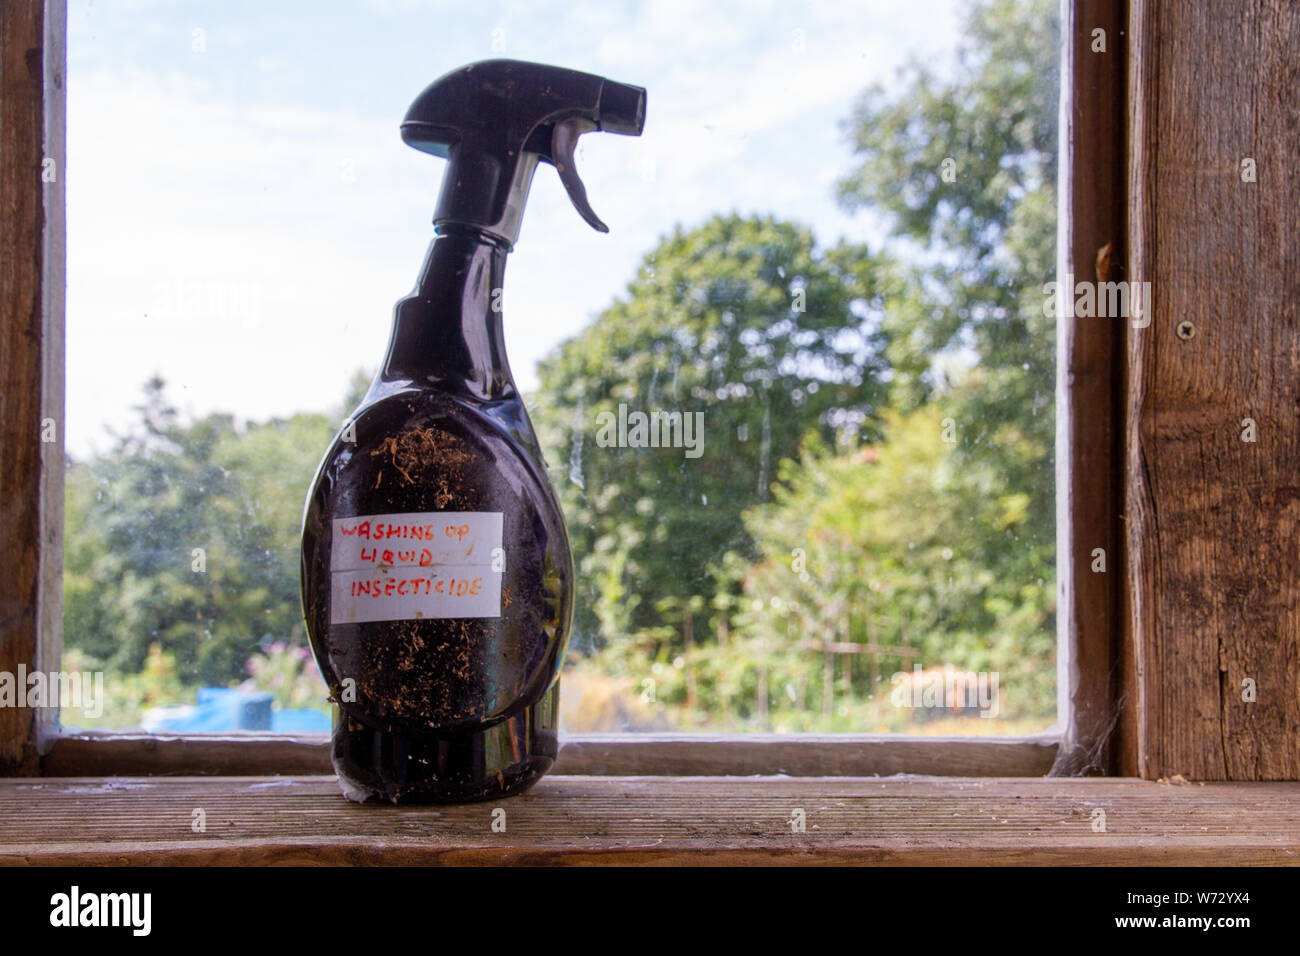 An old plastic spray bottle stands on the window ledge of a garden shed, with handwritten label 'Washing up liquid insecticide' stuck on it side Stock Photo